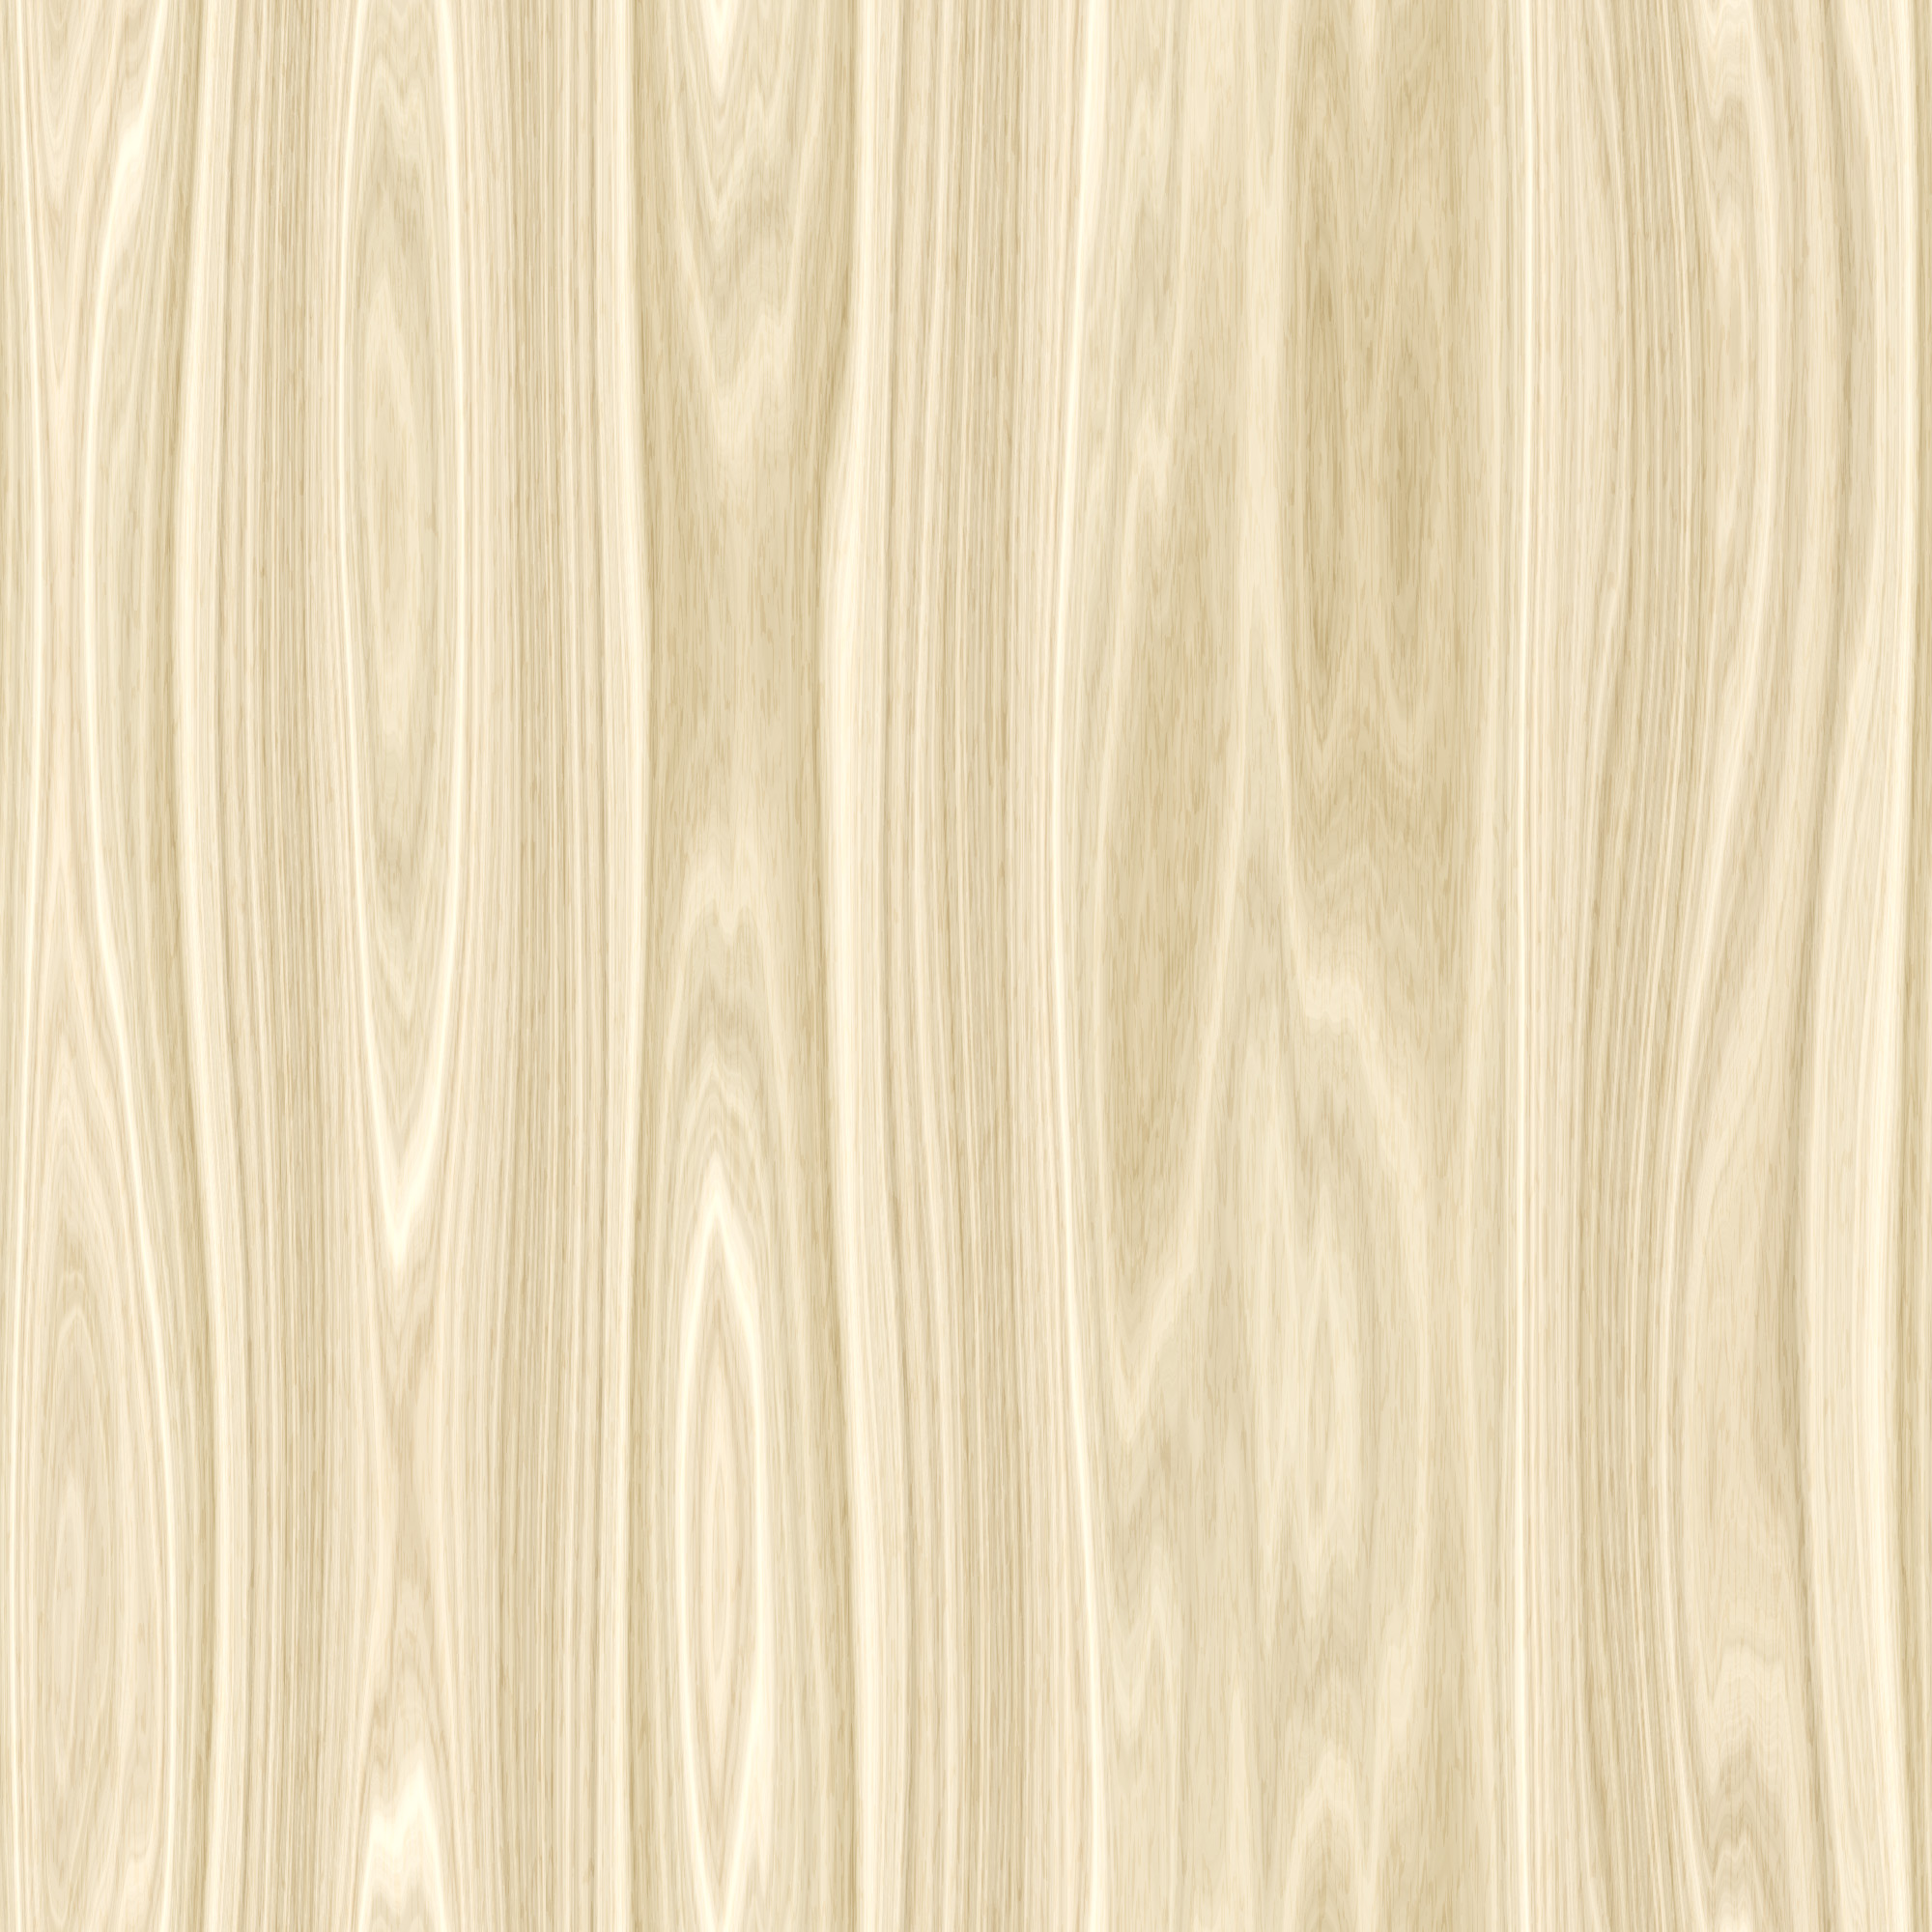 White Seamlles Wood Texture Quality